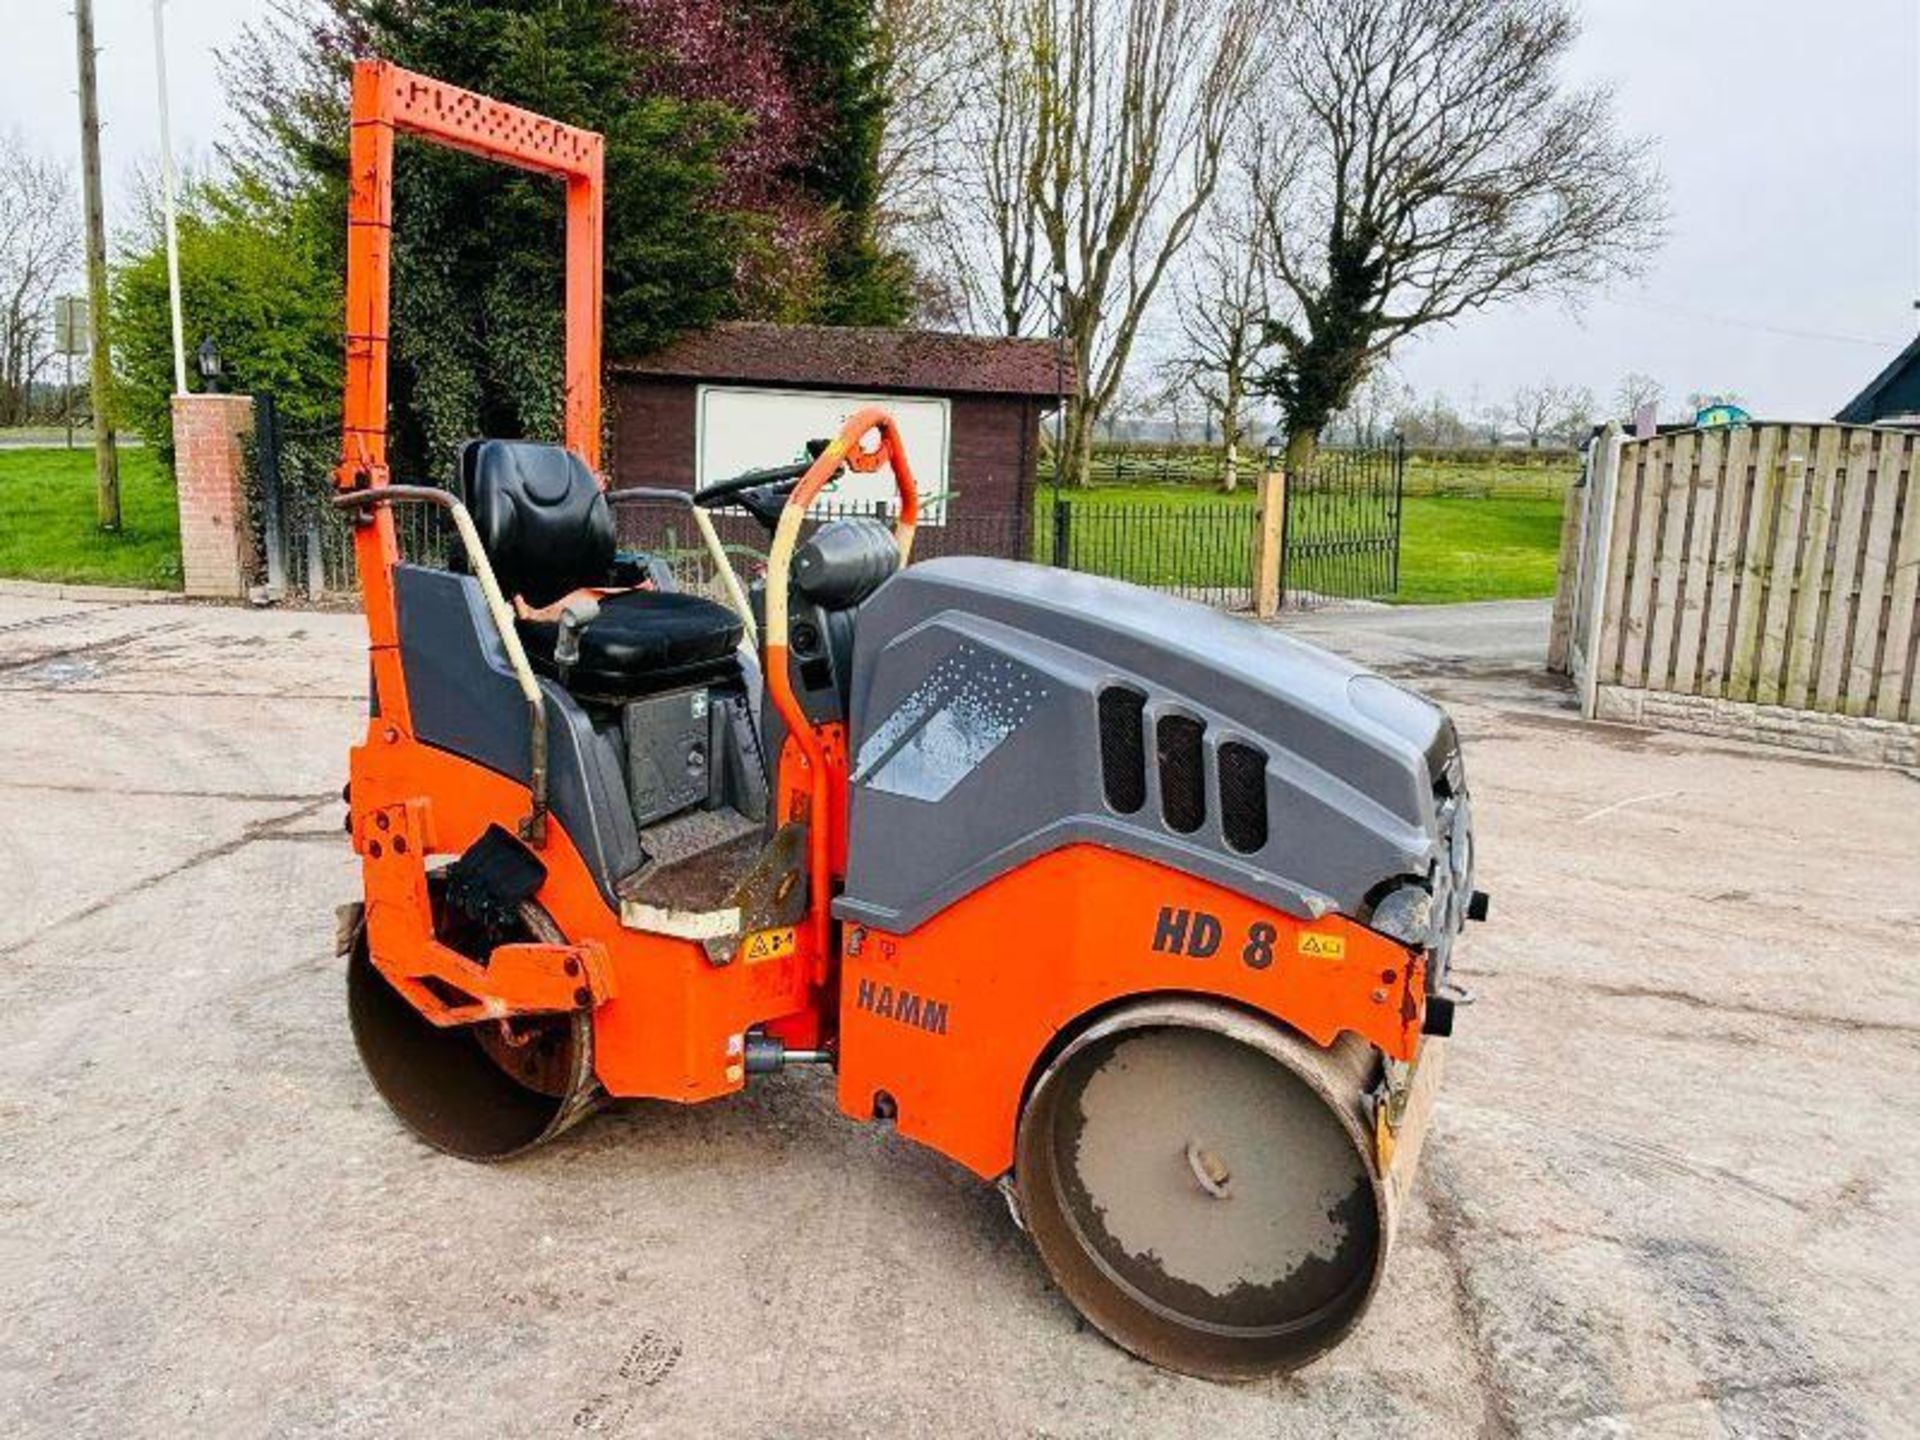 HAMM HD8 DOUBLE DRUM ROLLER *YEAR 2014, 497 HOURS* C/W ROLE BAR